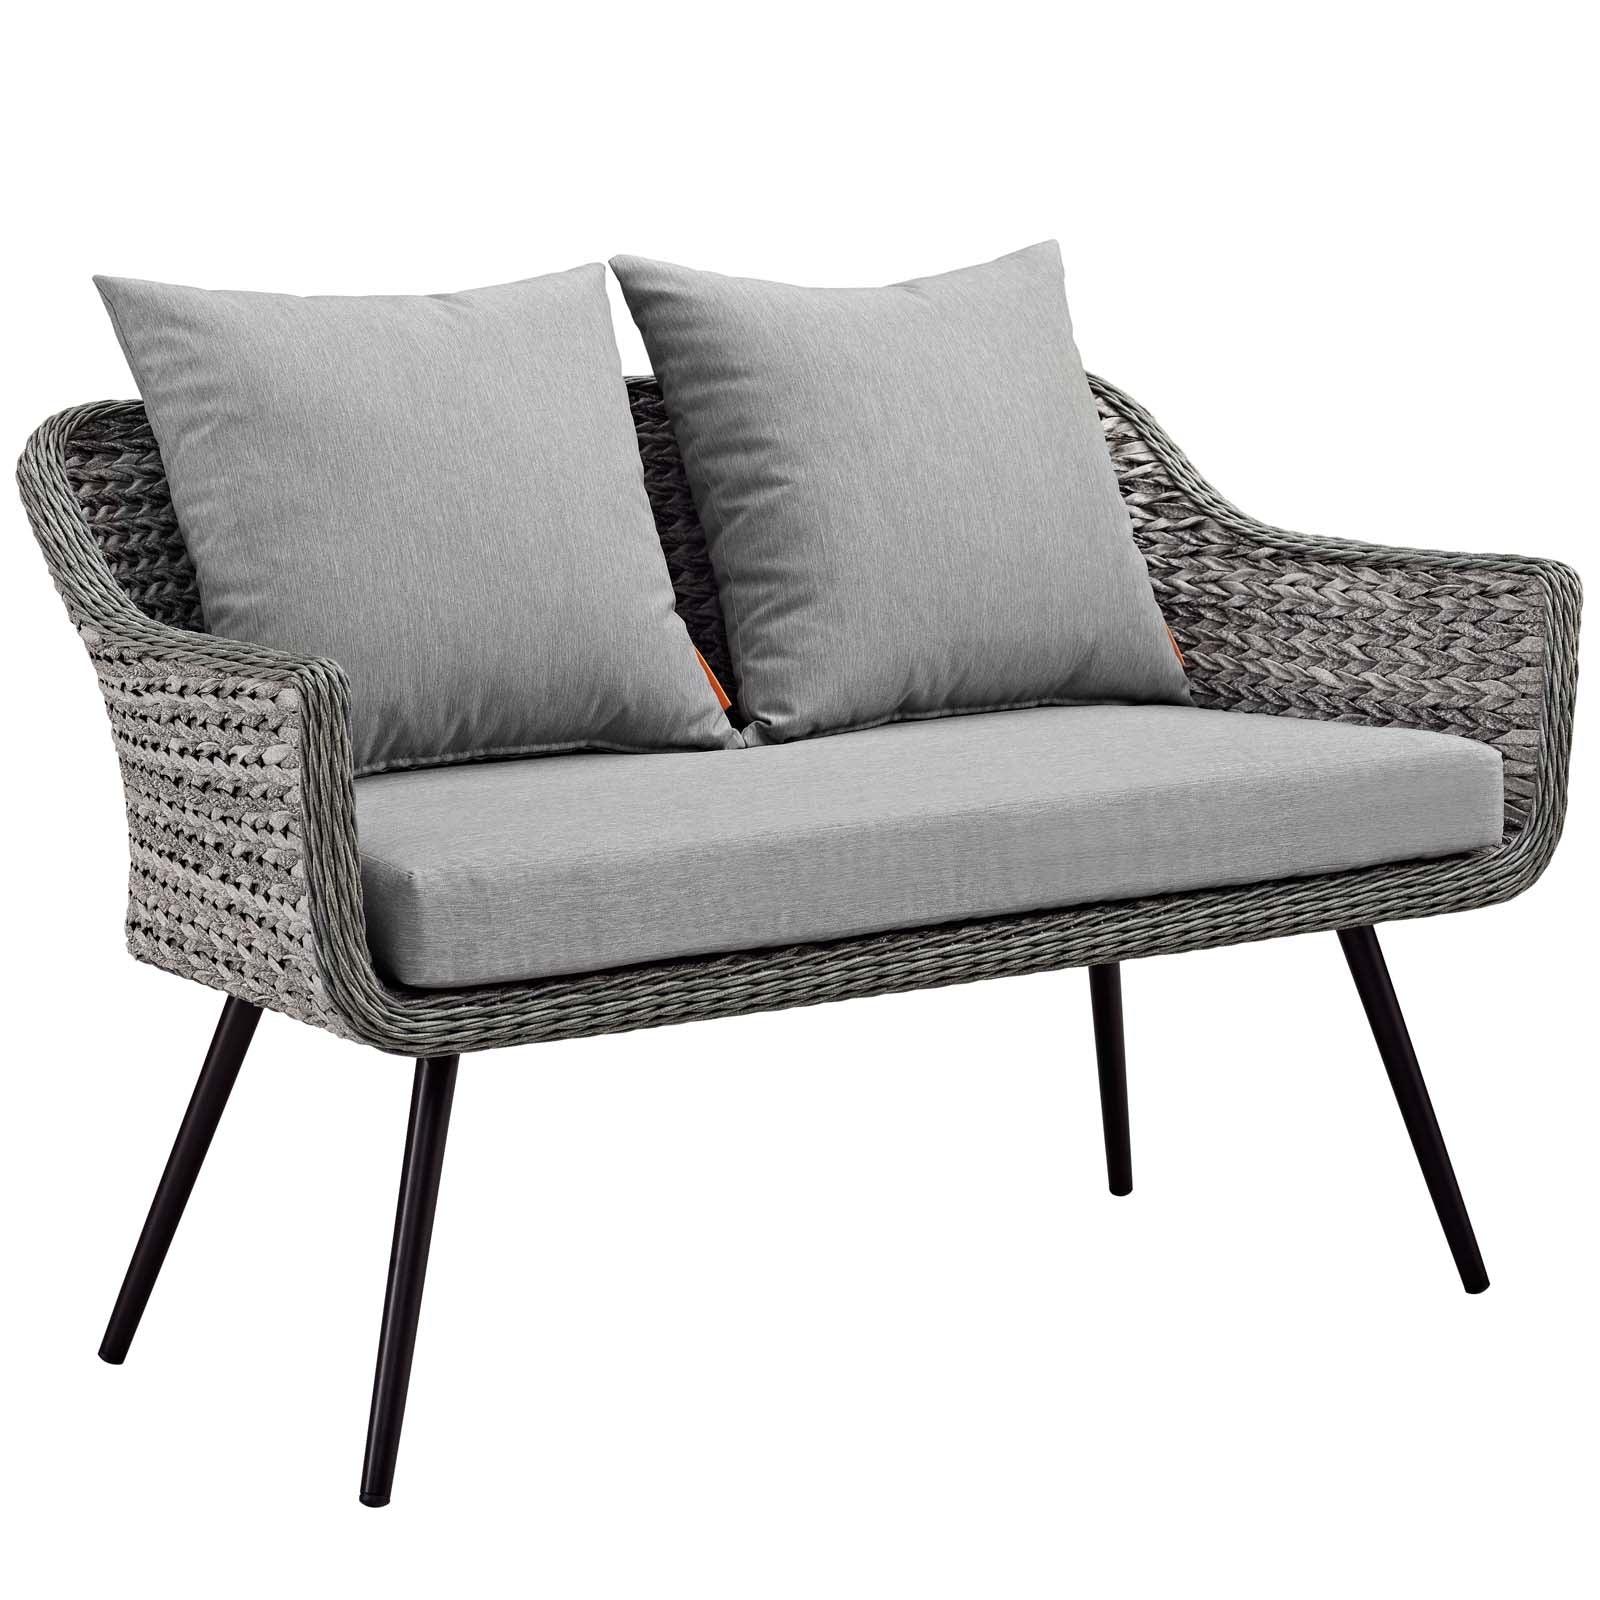 Modway Endeavor 2 Piece Outdoor Patio Wicker Rattan Loveseat and Armchair Set FredCo